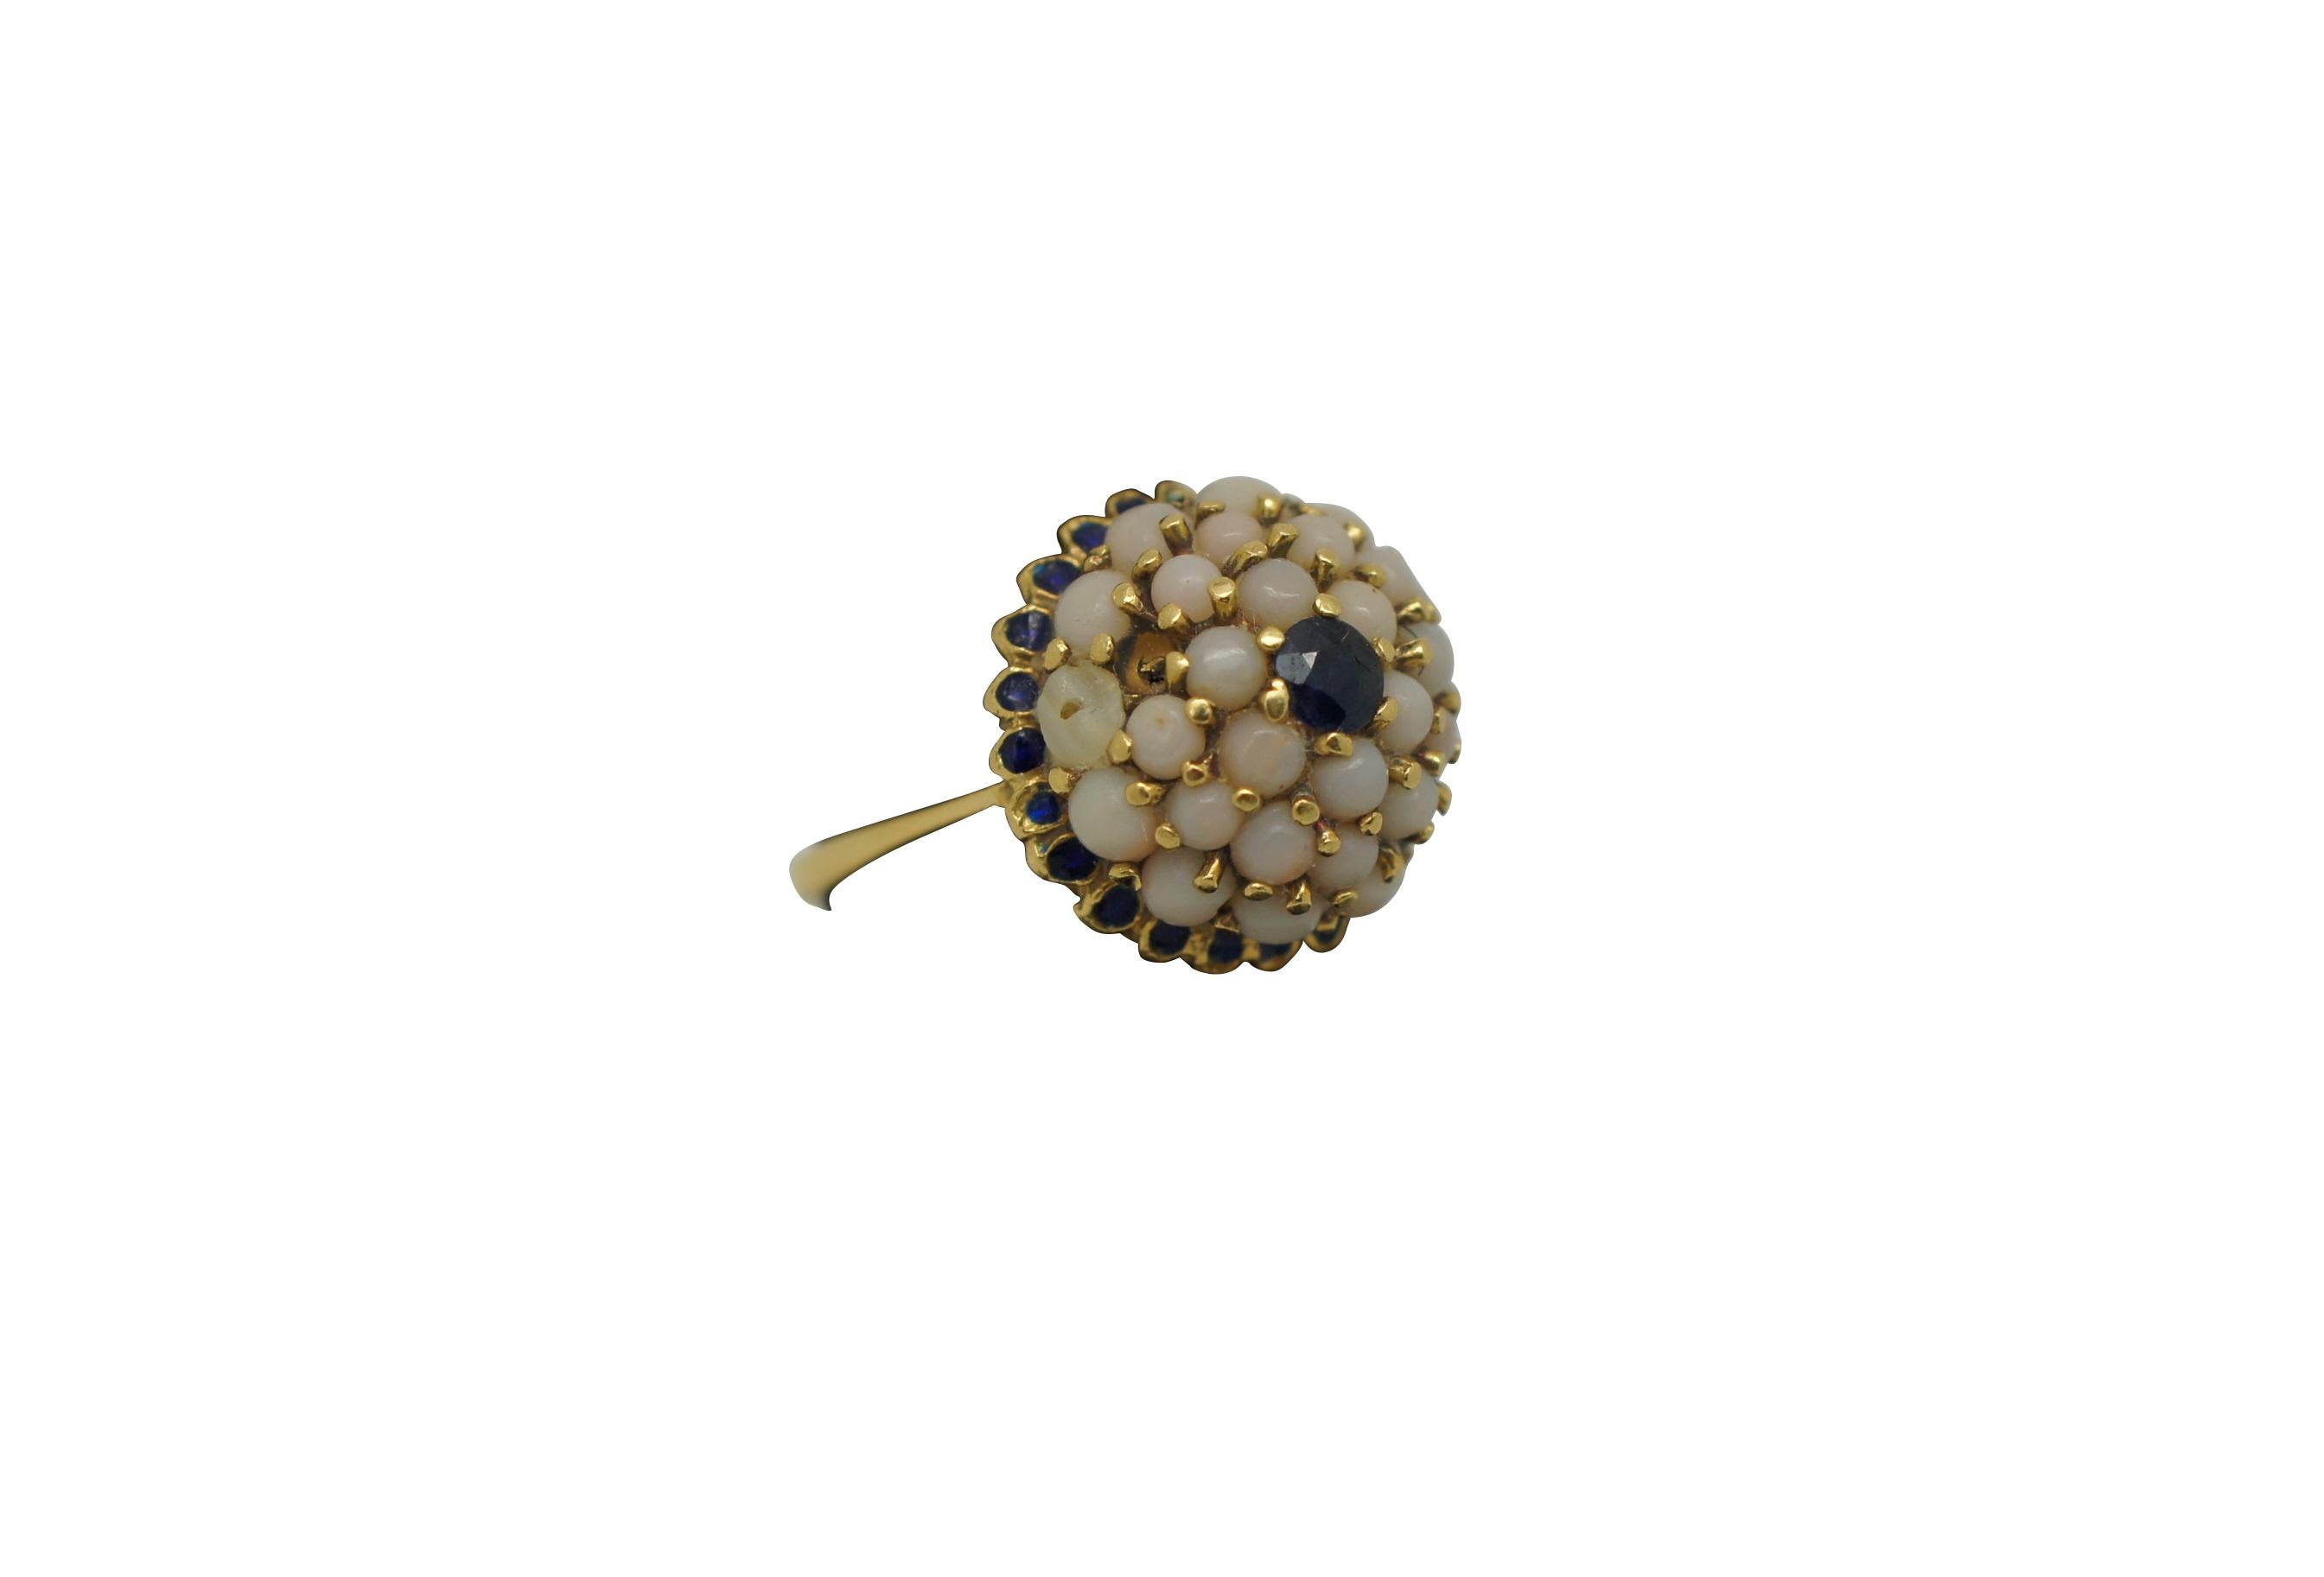 Vintage 18K yellow gold cocktail ring featuring a dome cluster of pearls with sapphire at the center and surrounding the base.

Dimensions:
0.75